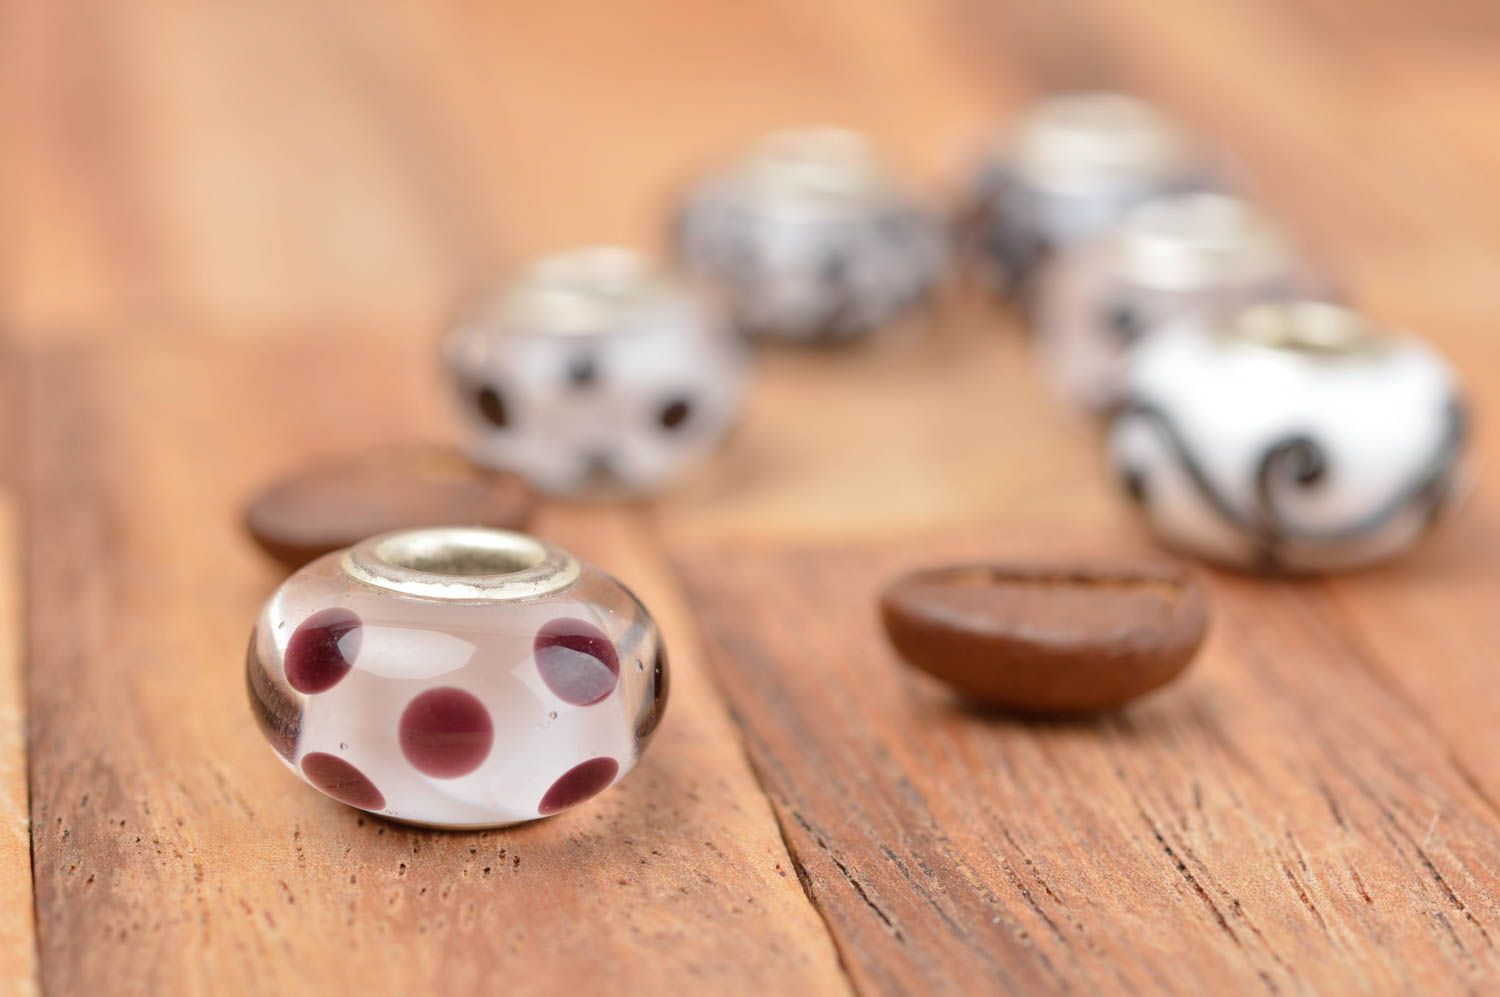 Designer fittings unusual beads unusual accessory fittings for jewelry photo 1